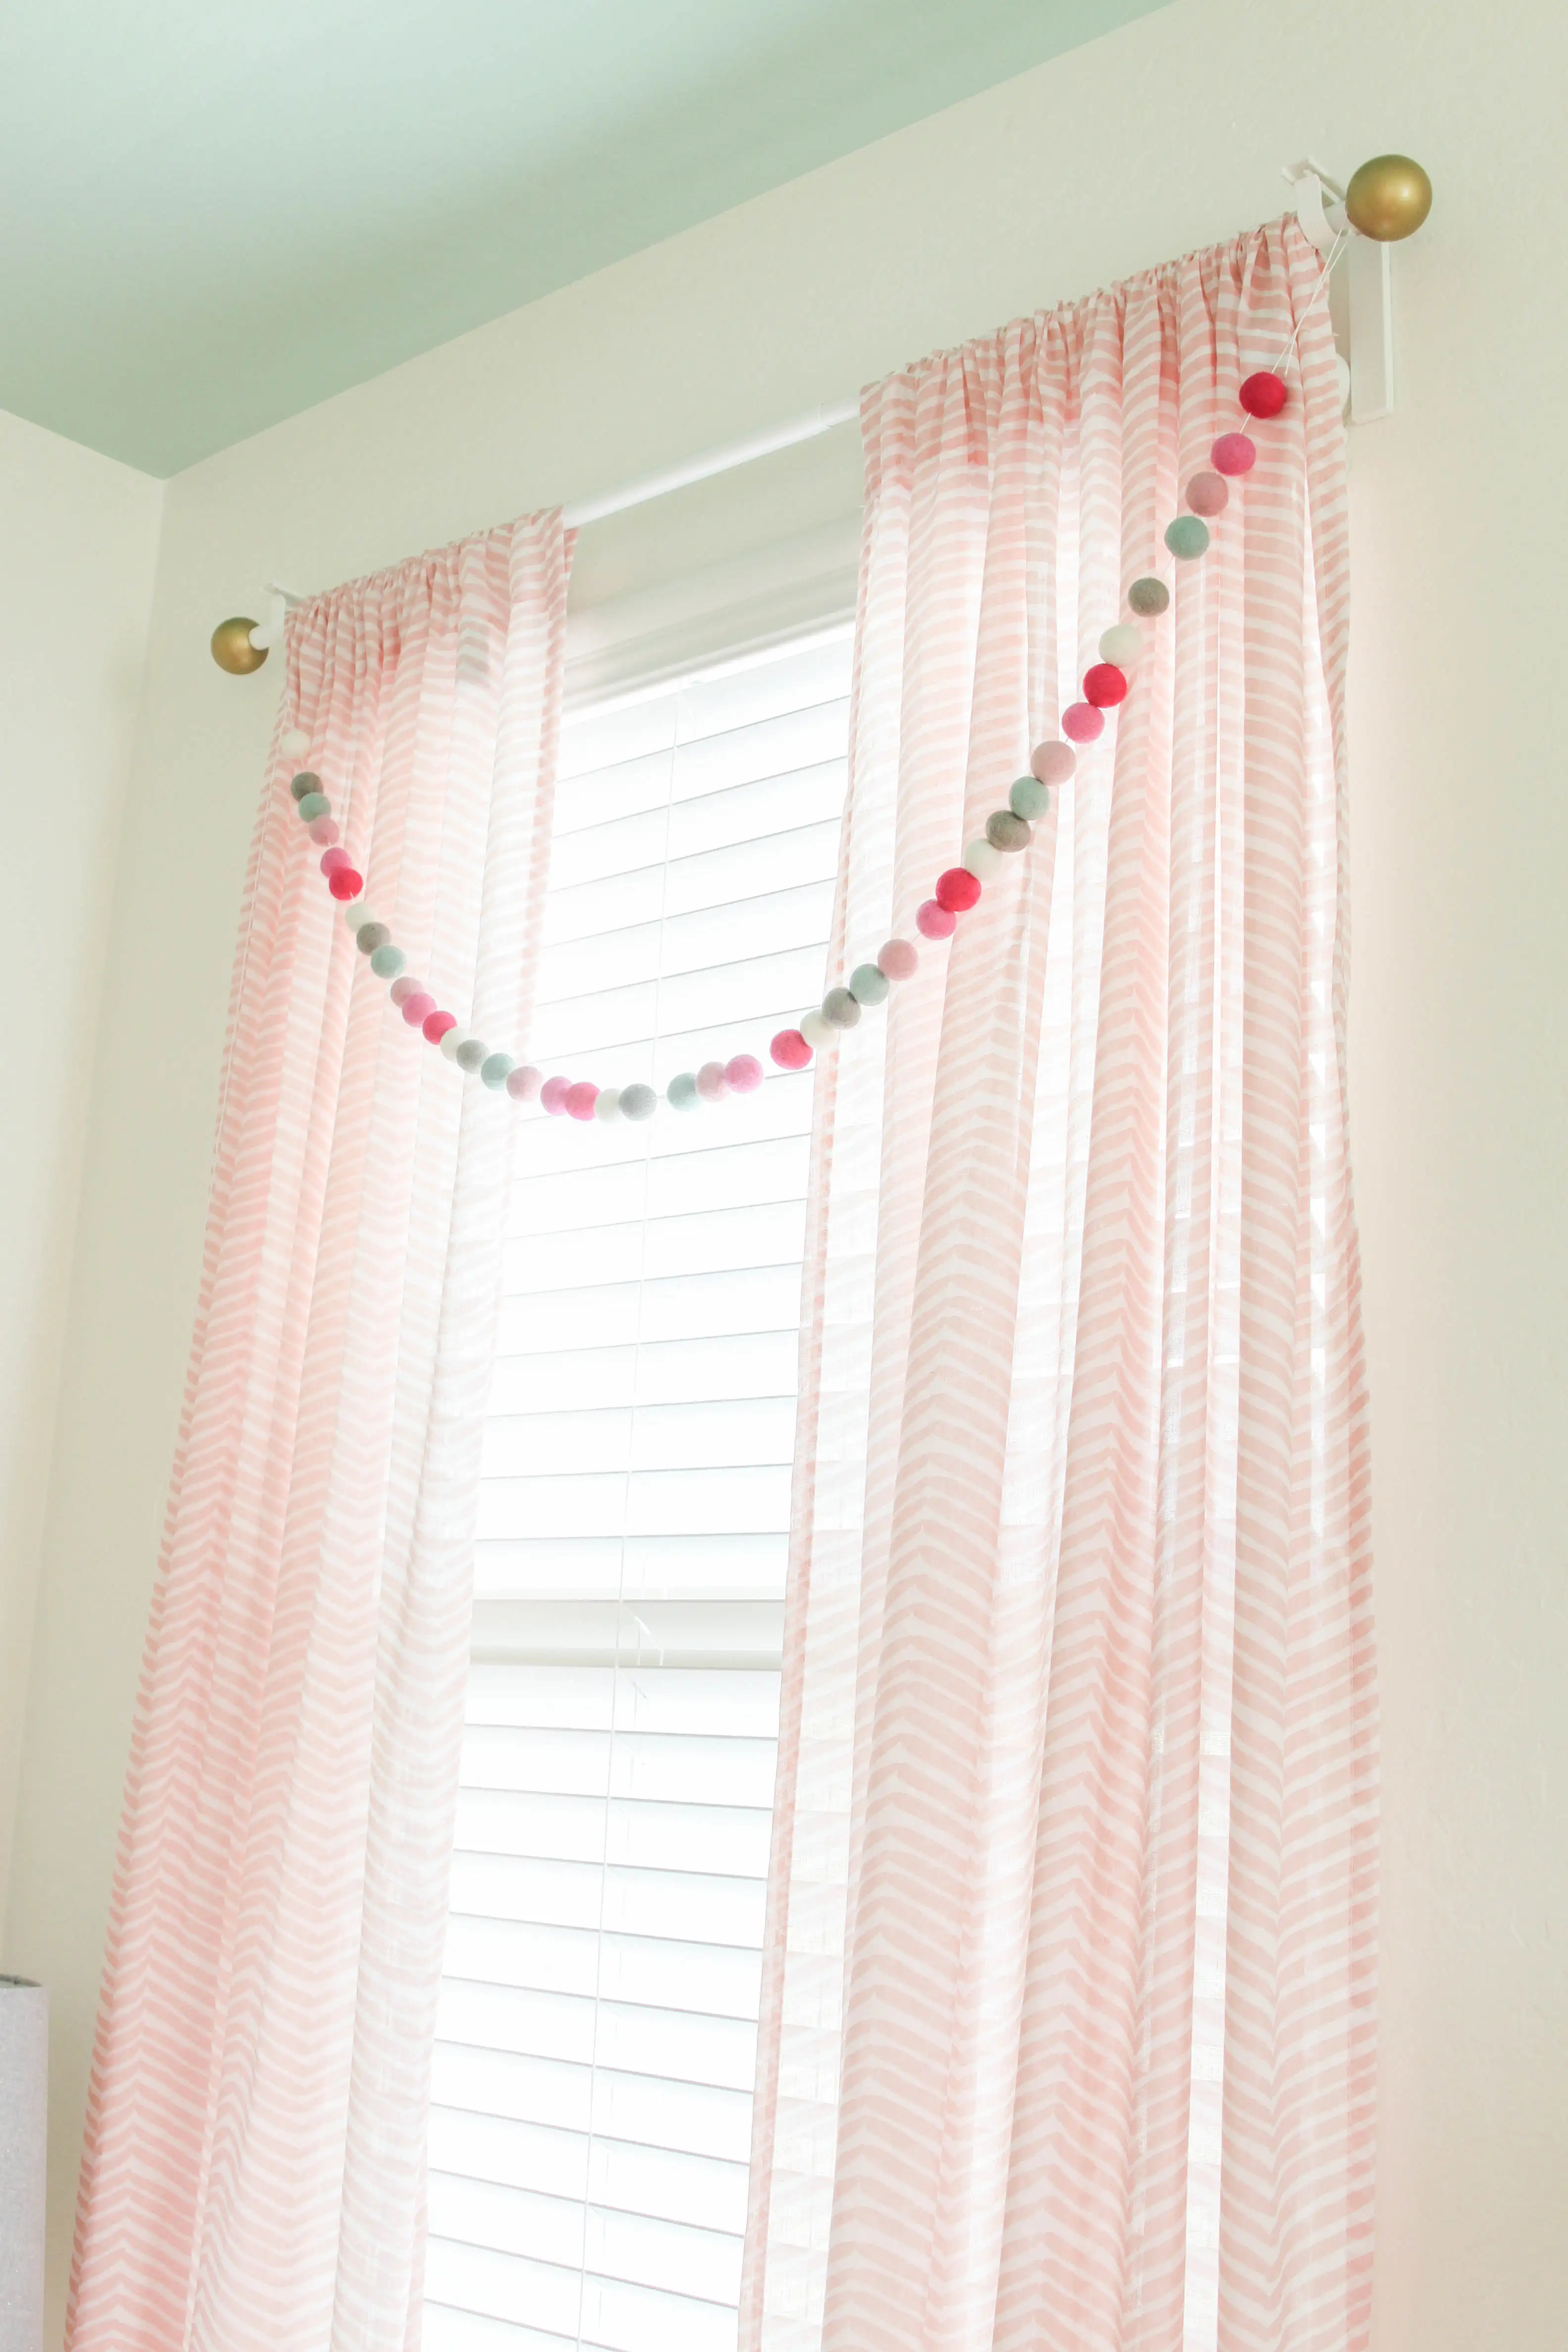 Decorative accents for nursery curtains